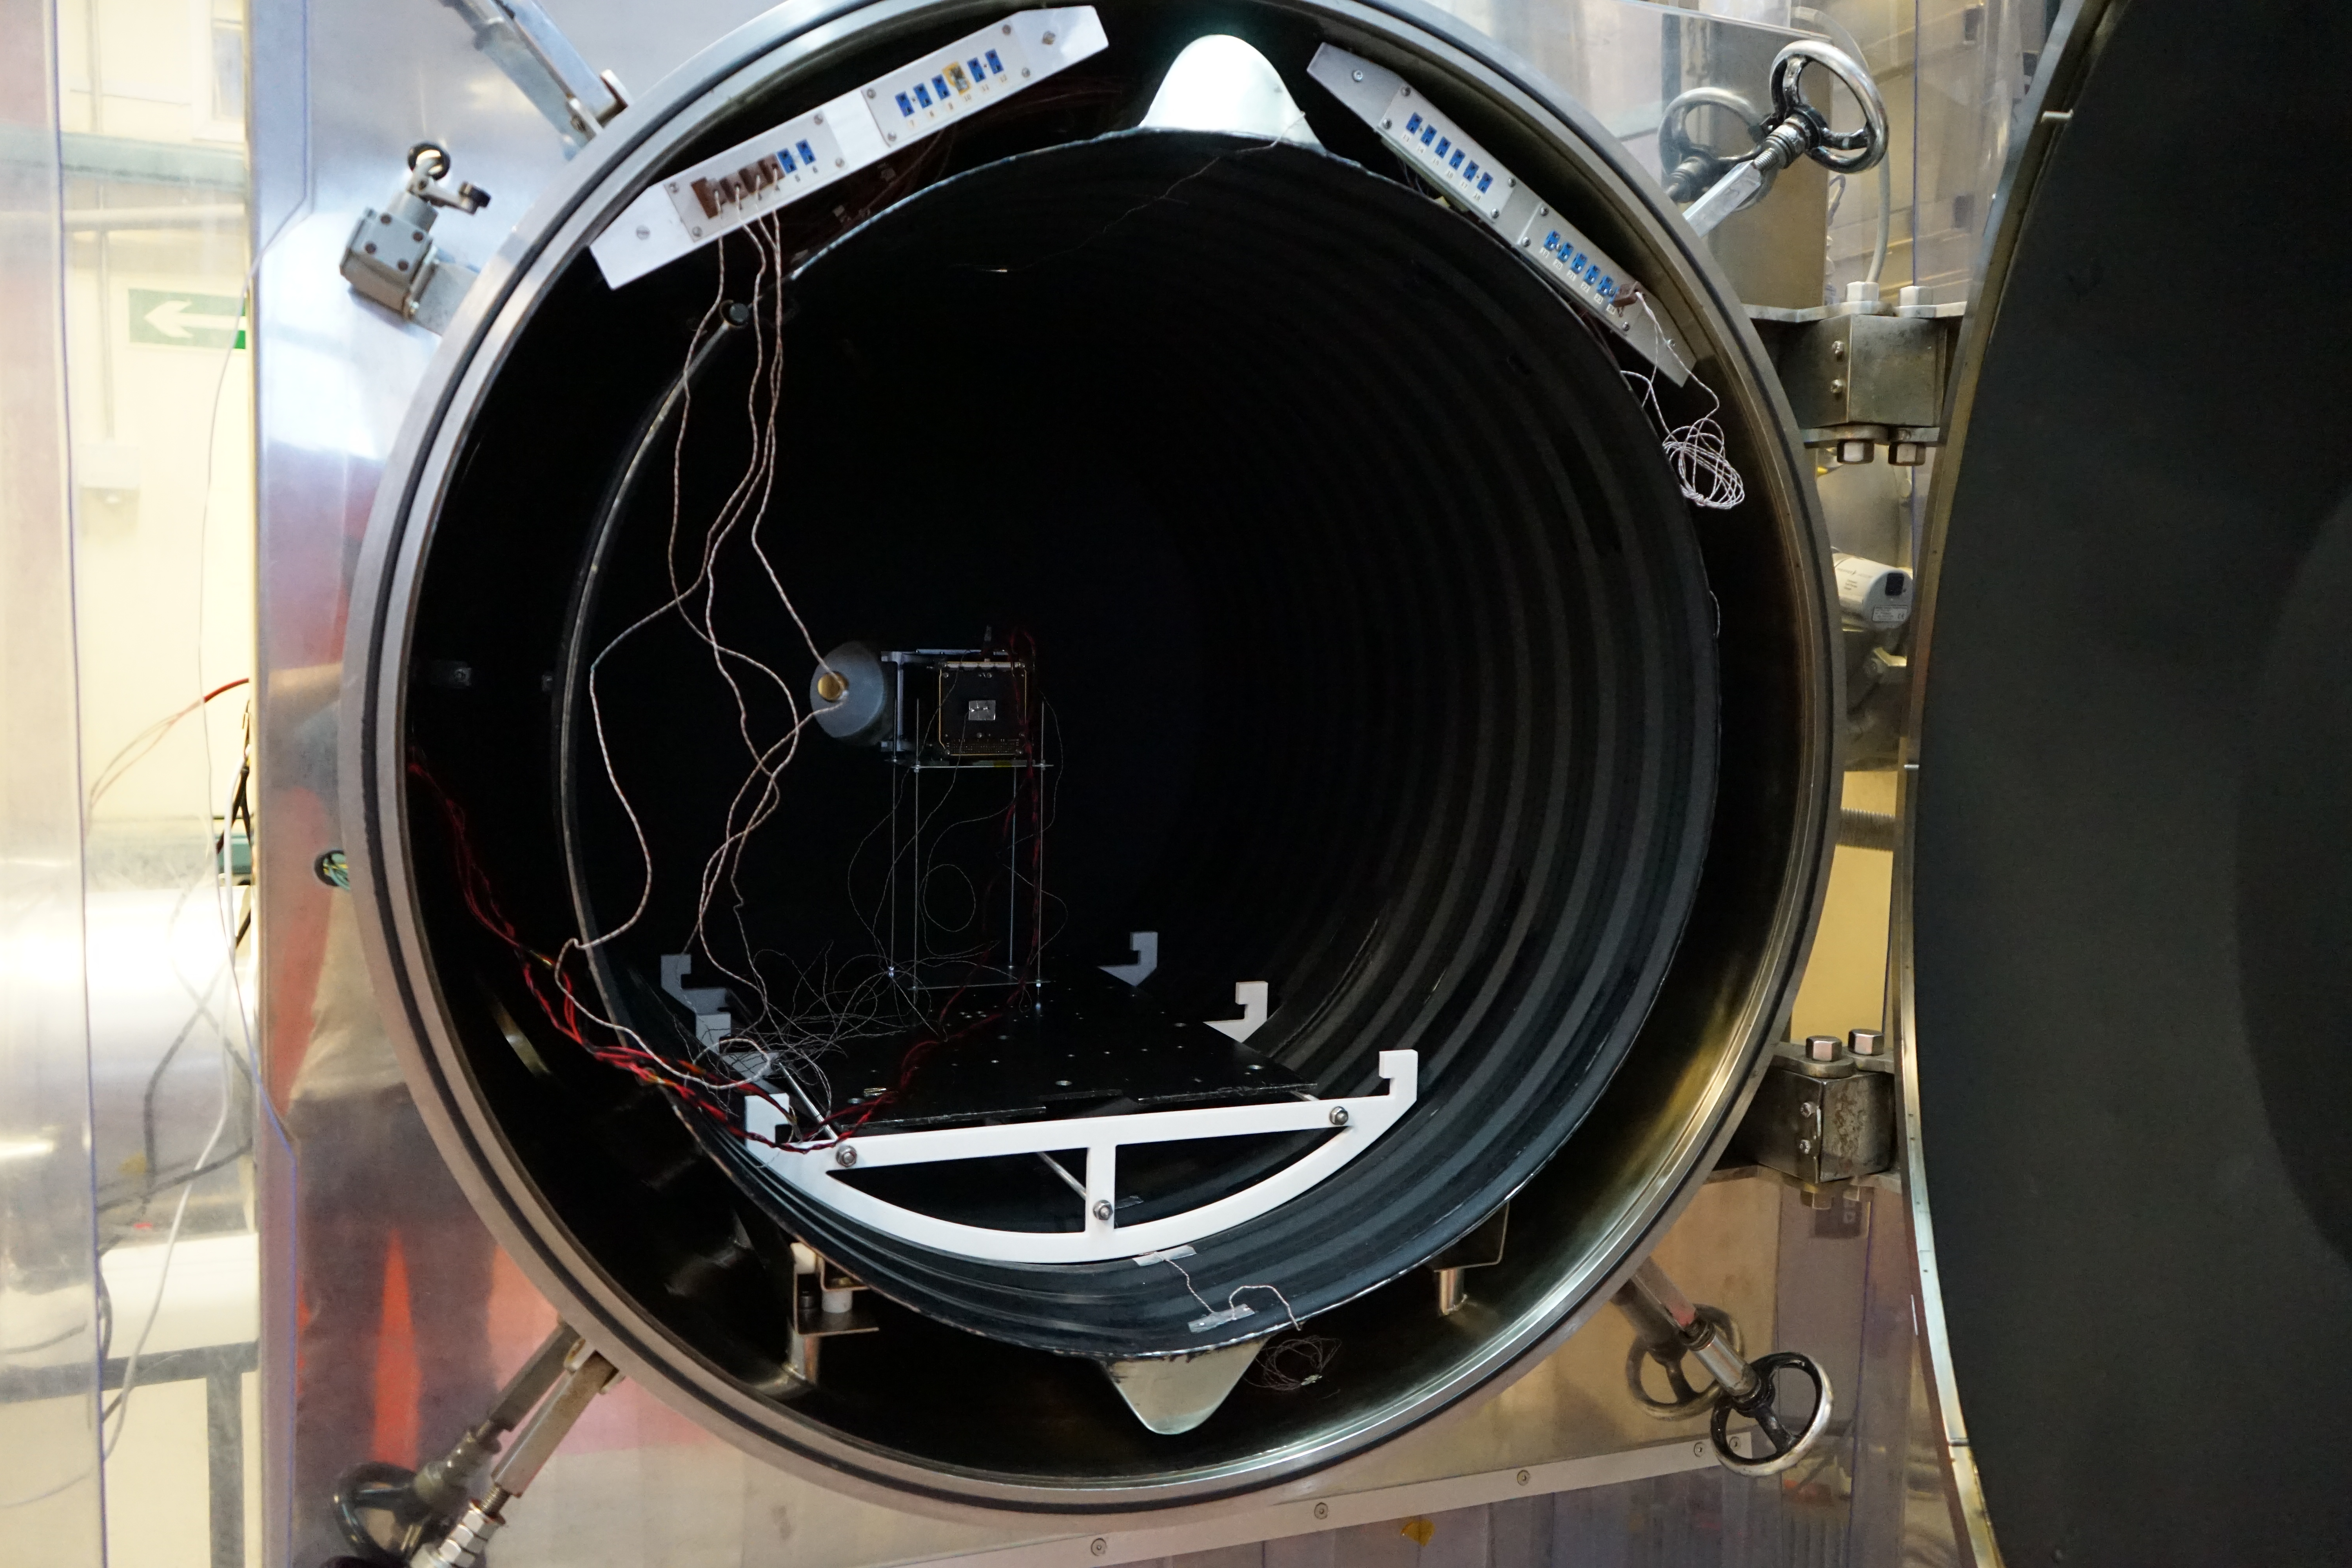 Image of the DRAGO instrument inside the thermo-vacuum chamber. Image taken at the INTA (National Institute for Aerospace Technology) Testing Area facilities. Credit: Samuel Sordo (IAC).